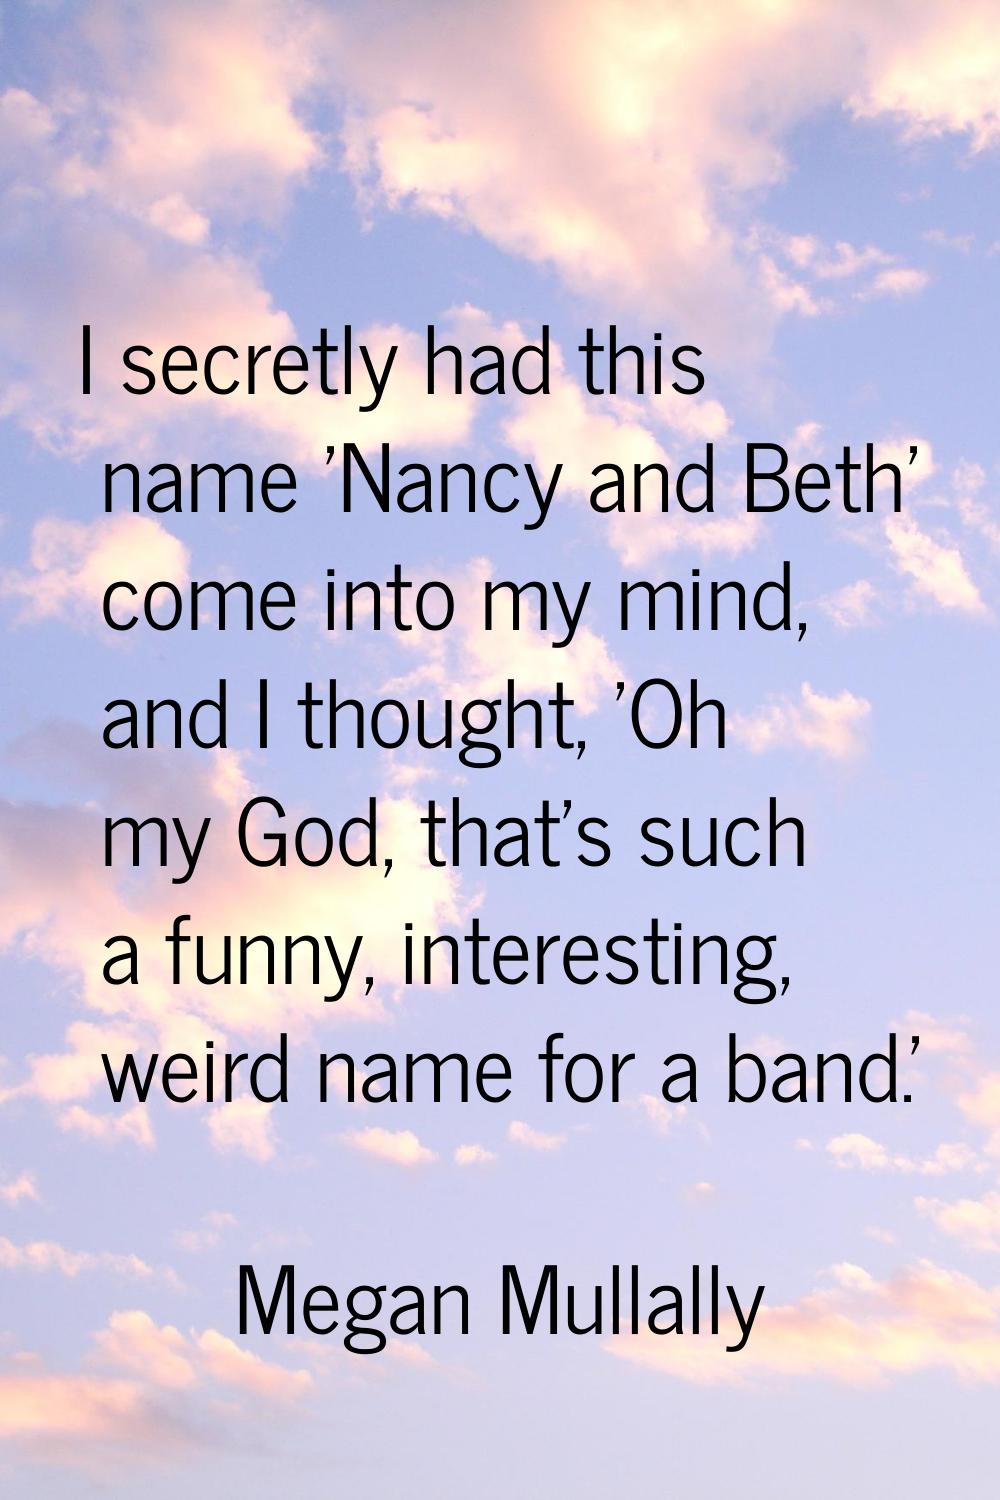 I secretly had this name 'Nancy and Beth' come into my mind, and I thought, 'Oh my God, that's such